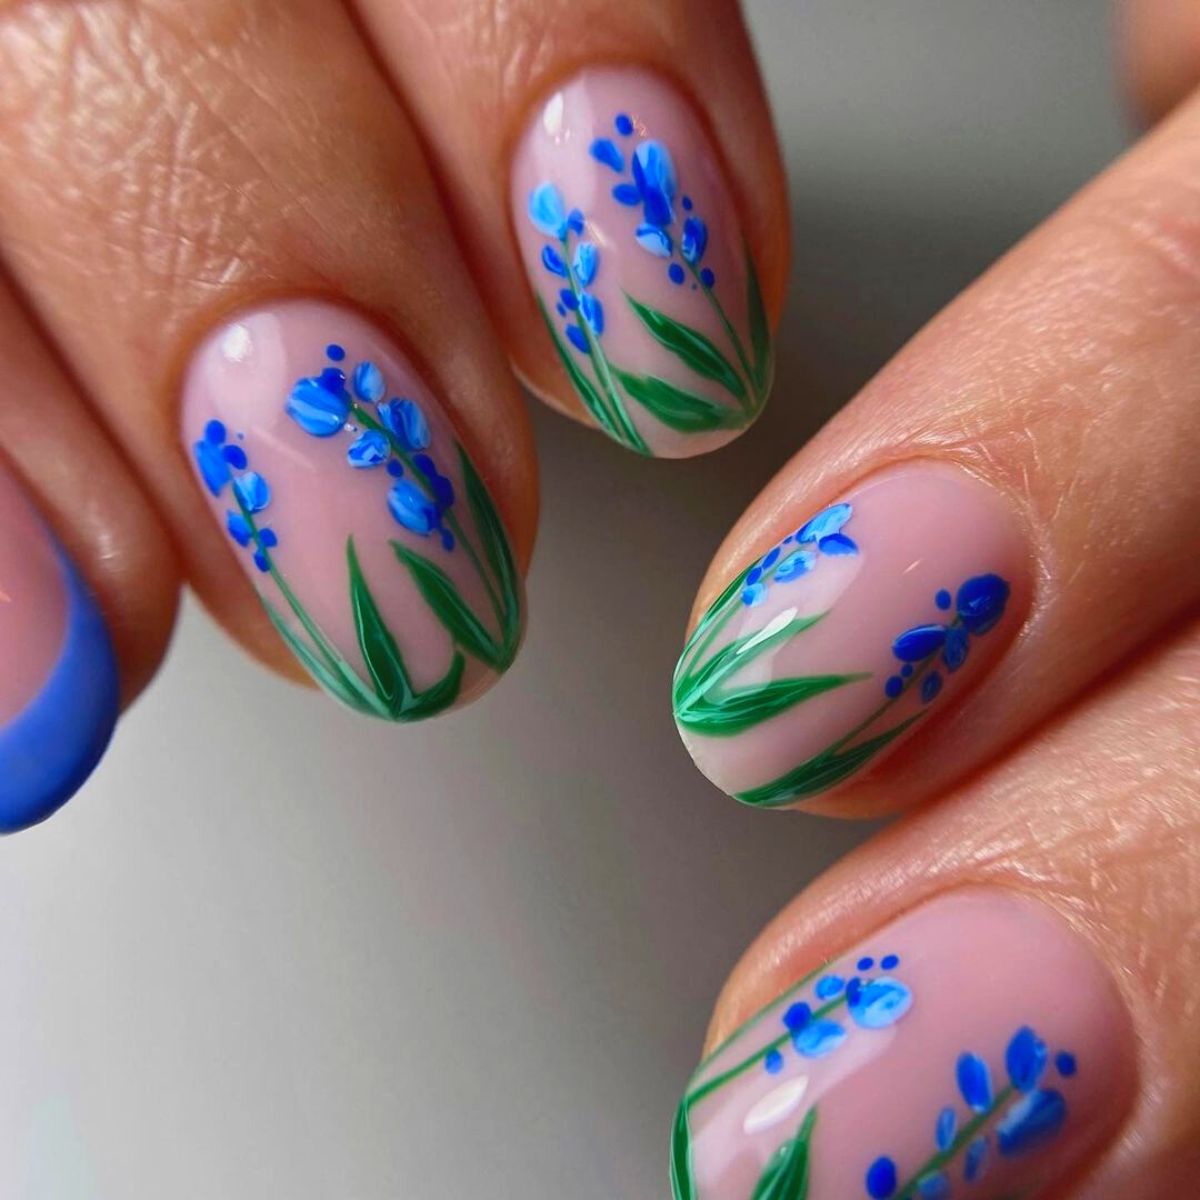 Bluebells on nails is a perfect floral option